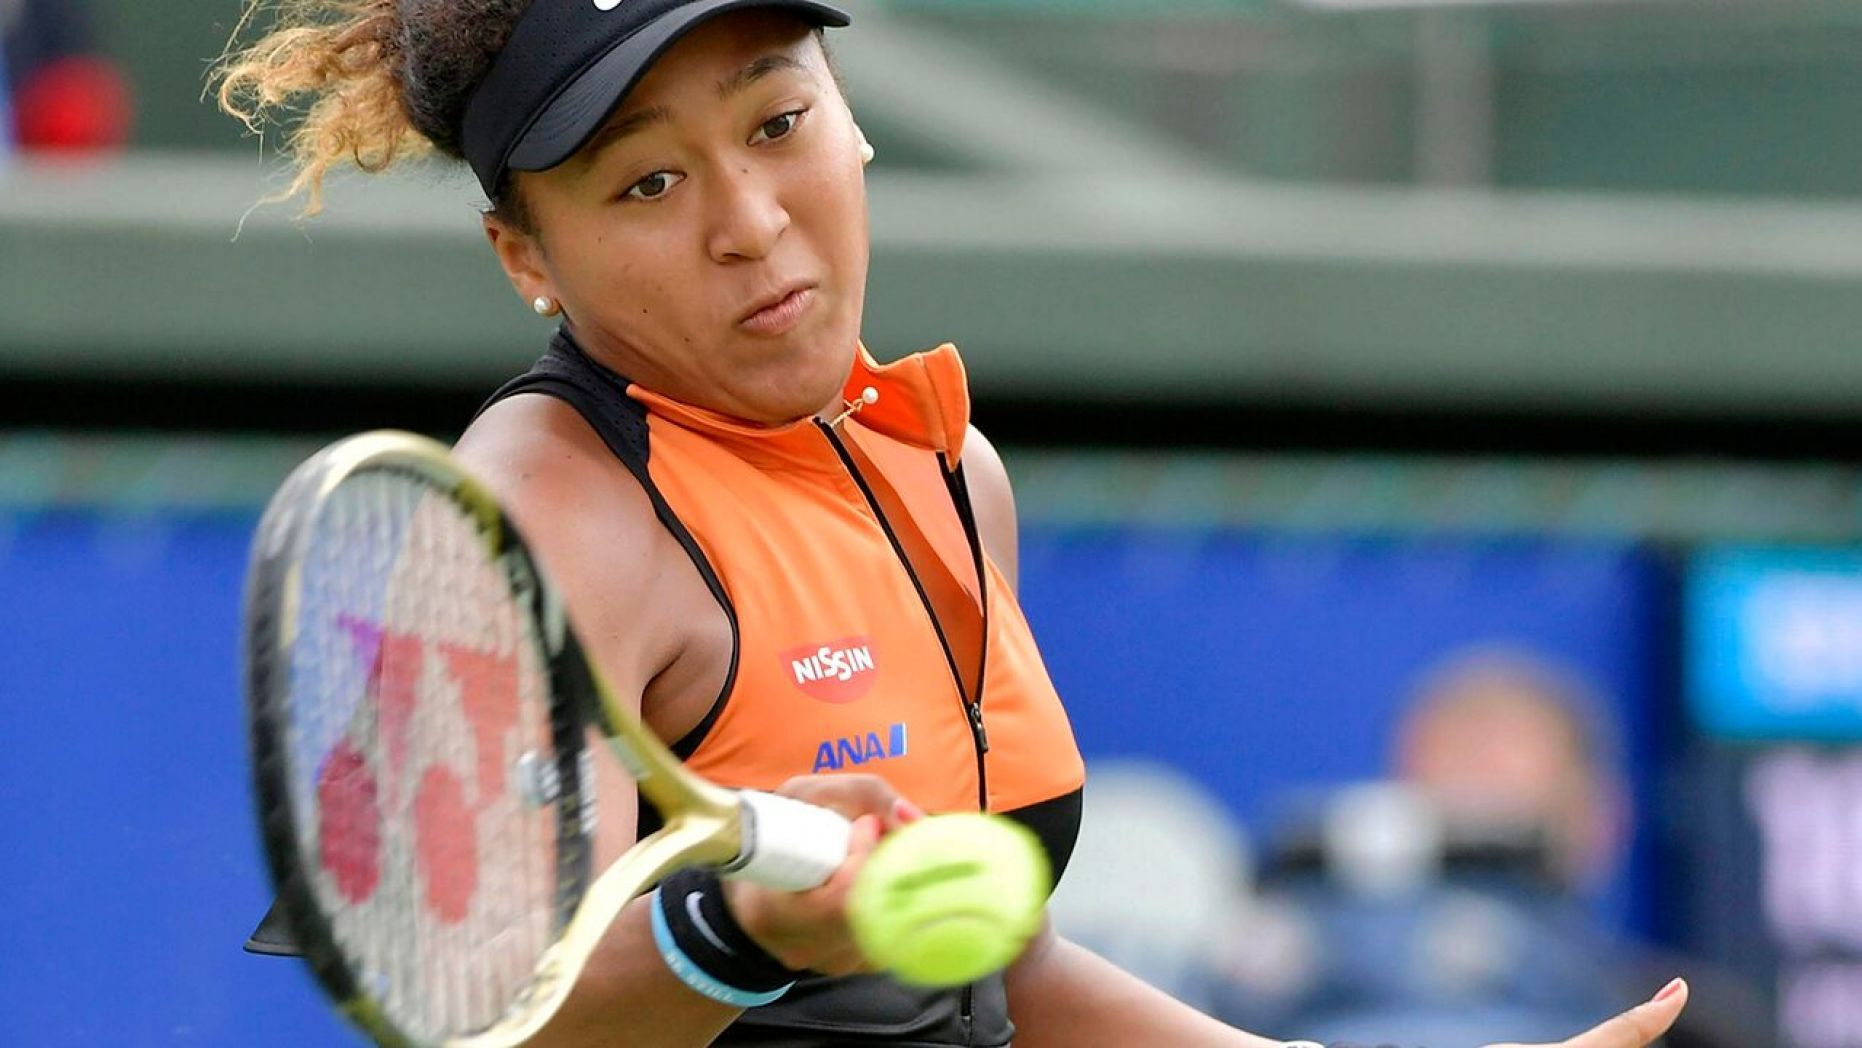 Naomi Osaka to give up US citizenship to play for Japan in 2020 Olympics